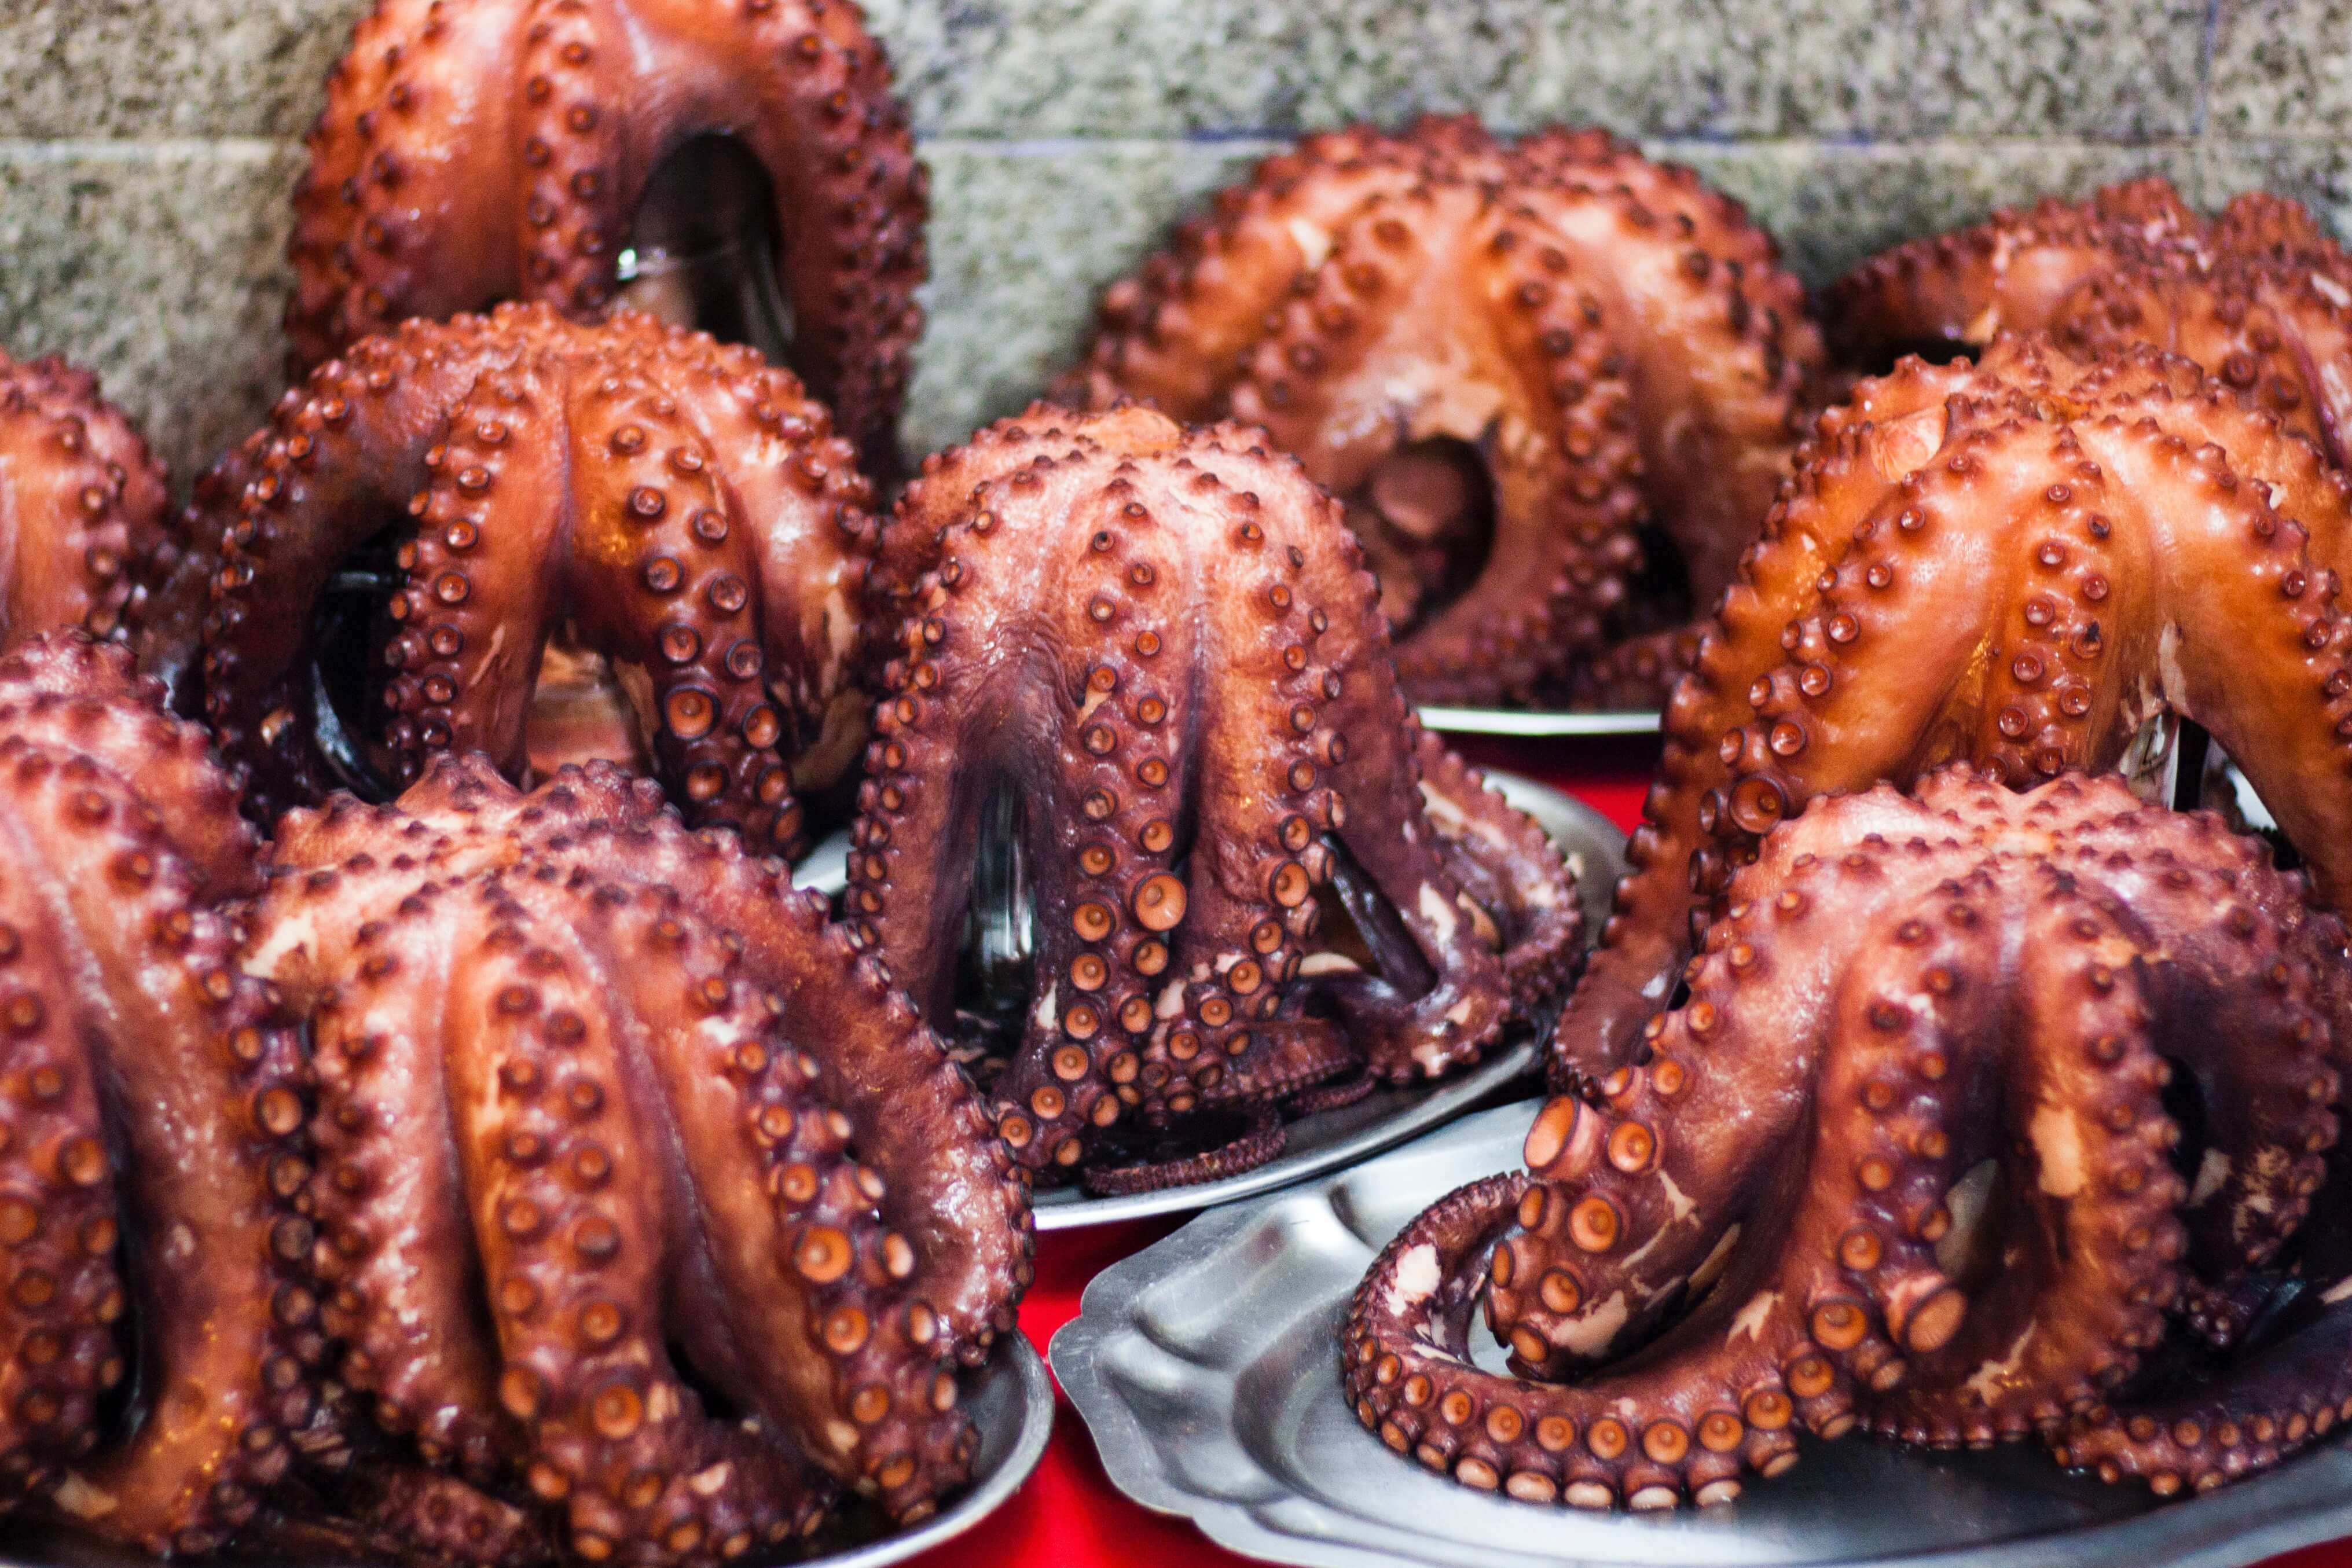 seafoodl ike pulpo is something you'll experience living in galicia